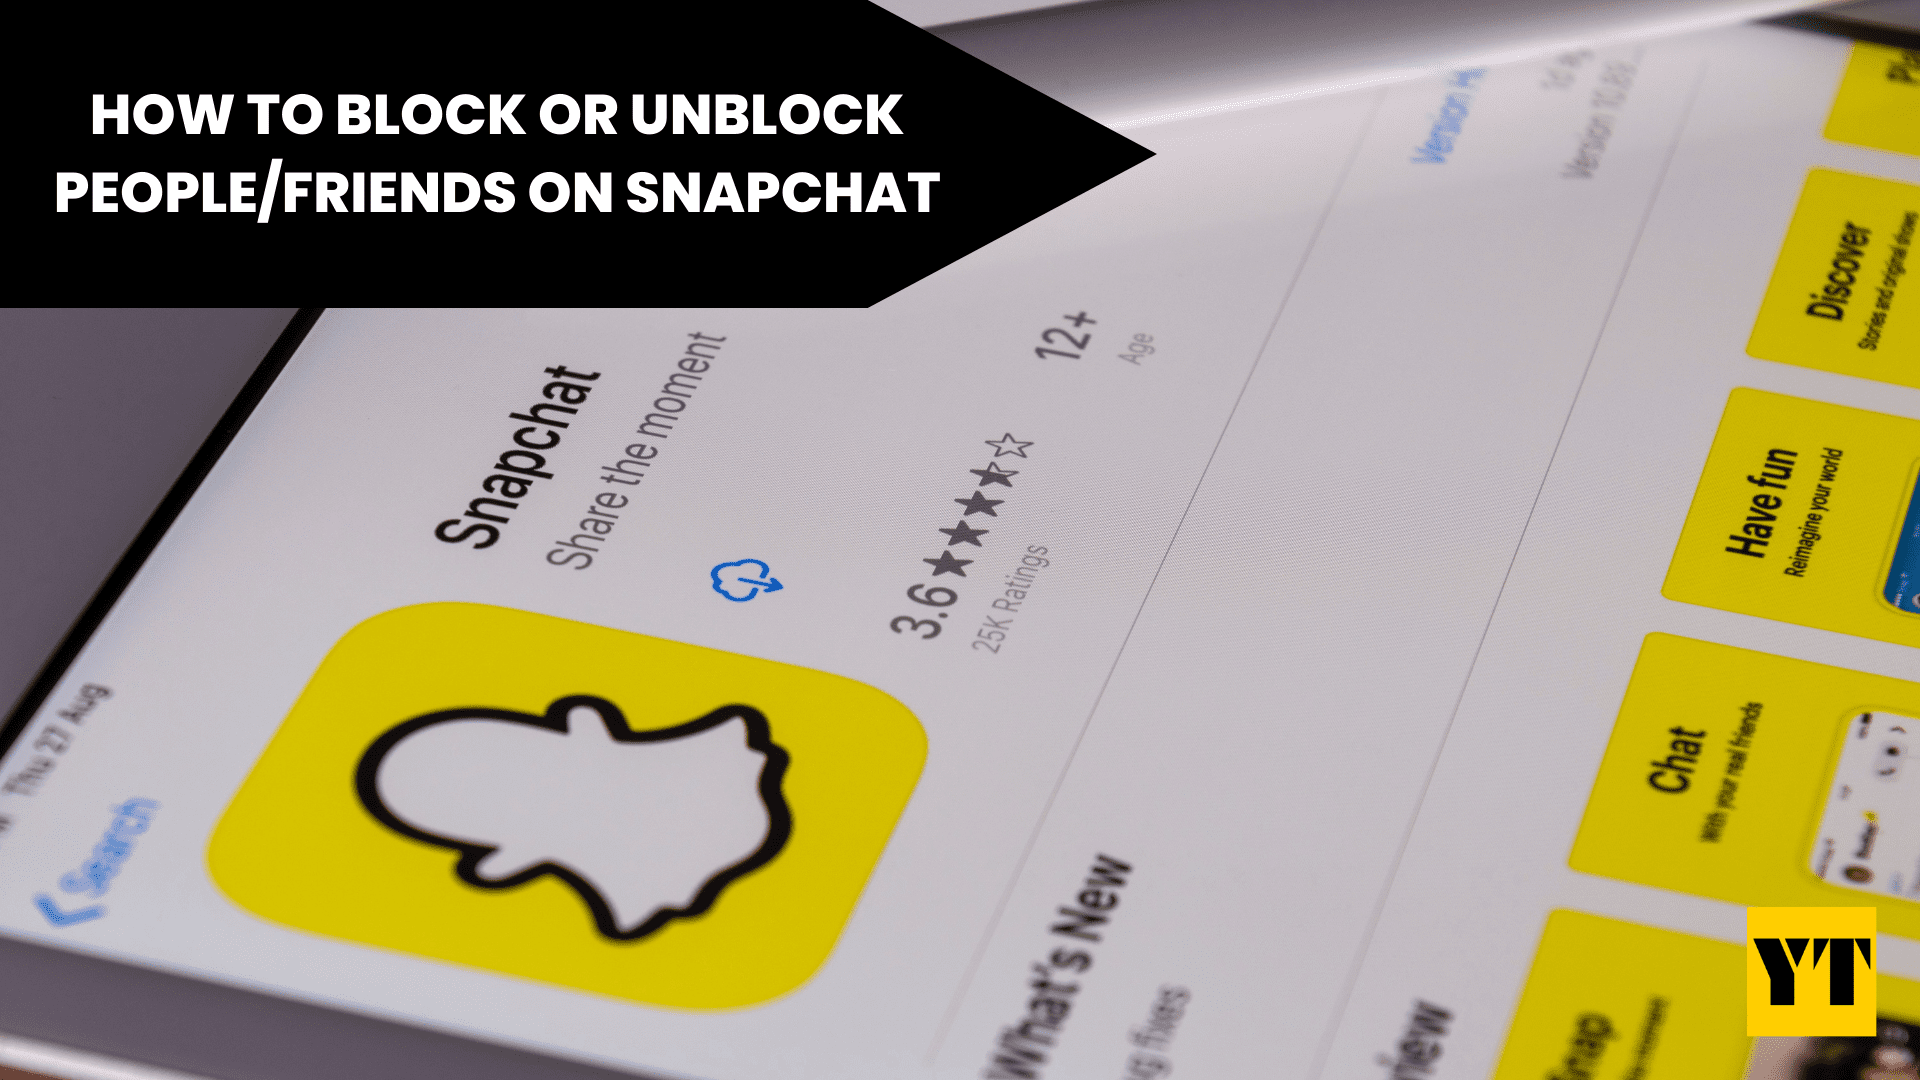 How to Block or Unblock People/Friends on Snapchat